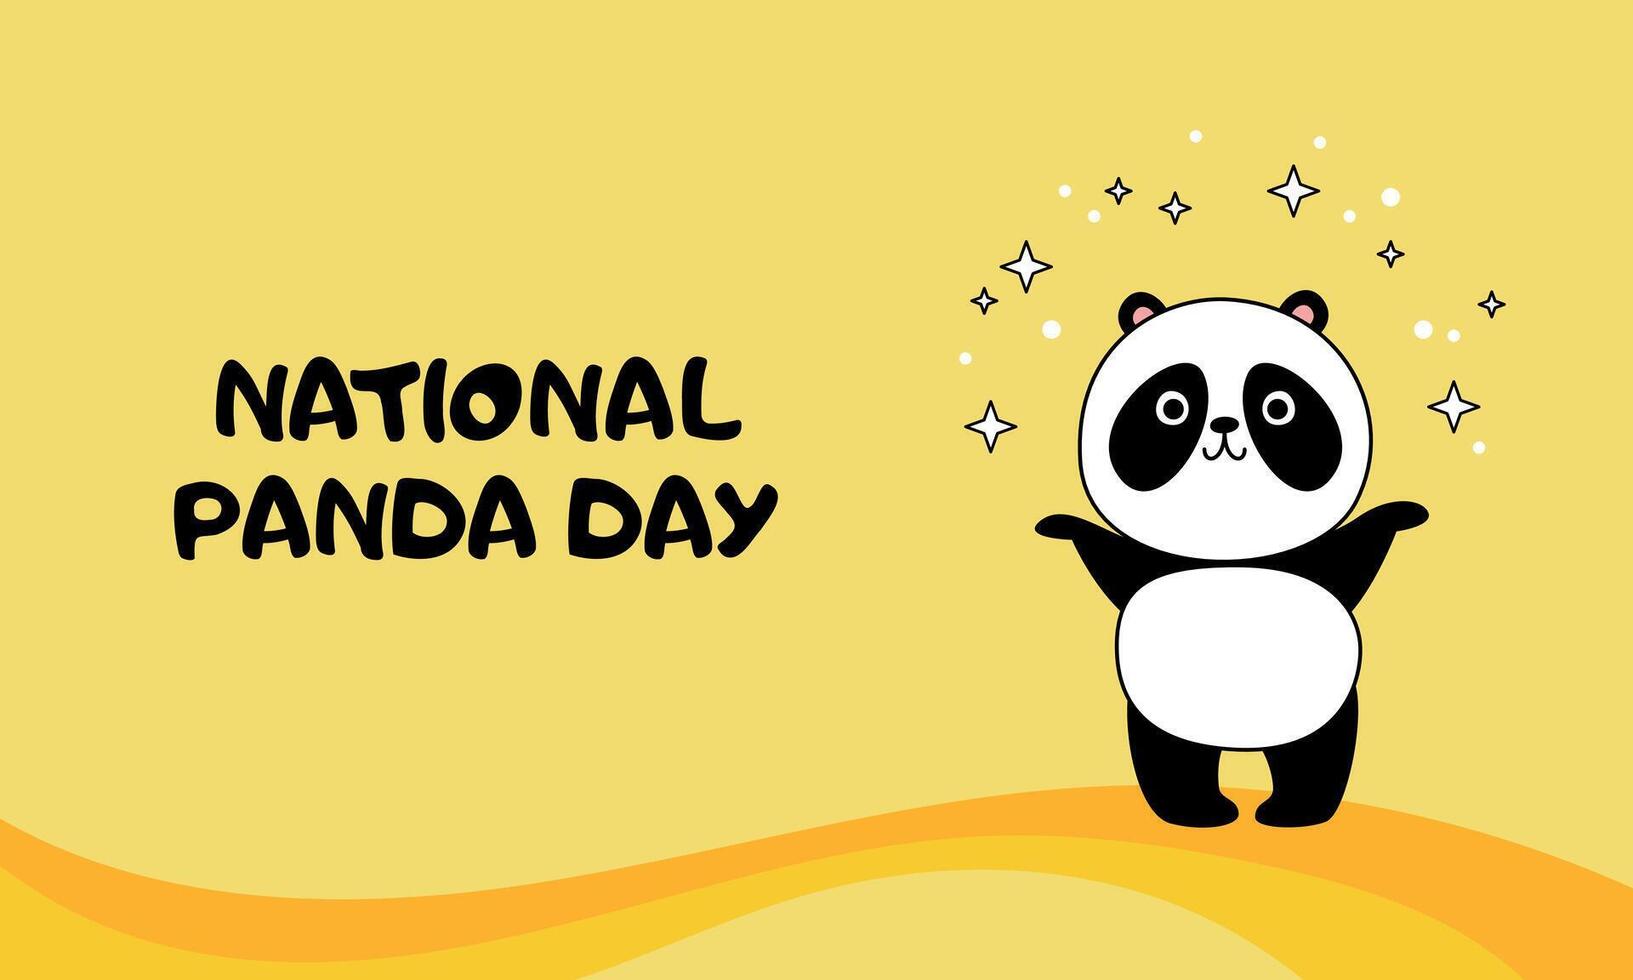 National Panda Day banner, March 16. Cute cartoon panda scatters stars. With an inscription. Vector illustration